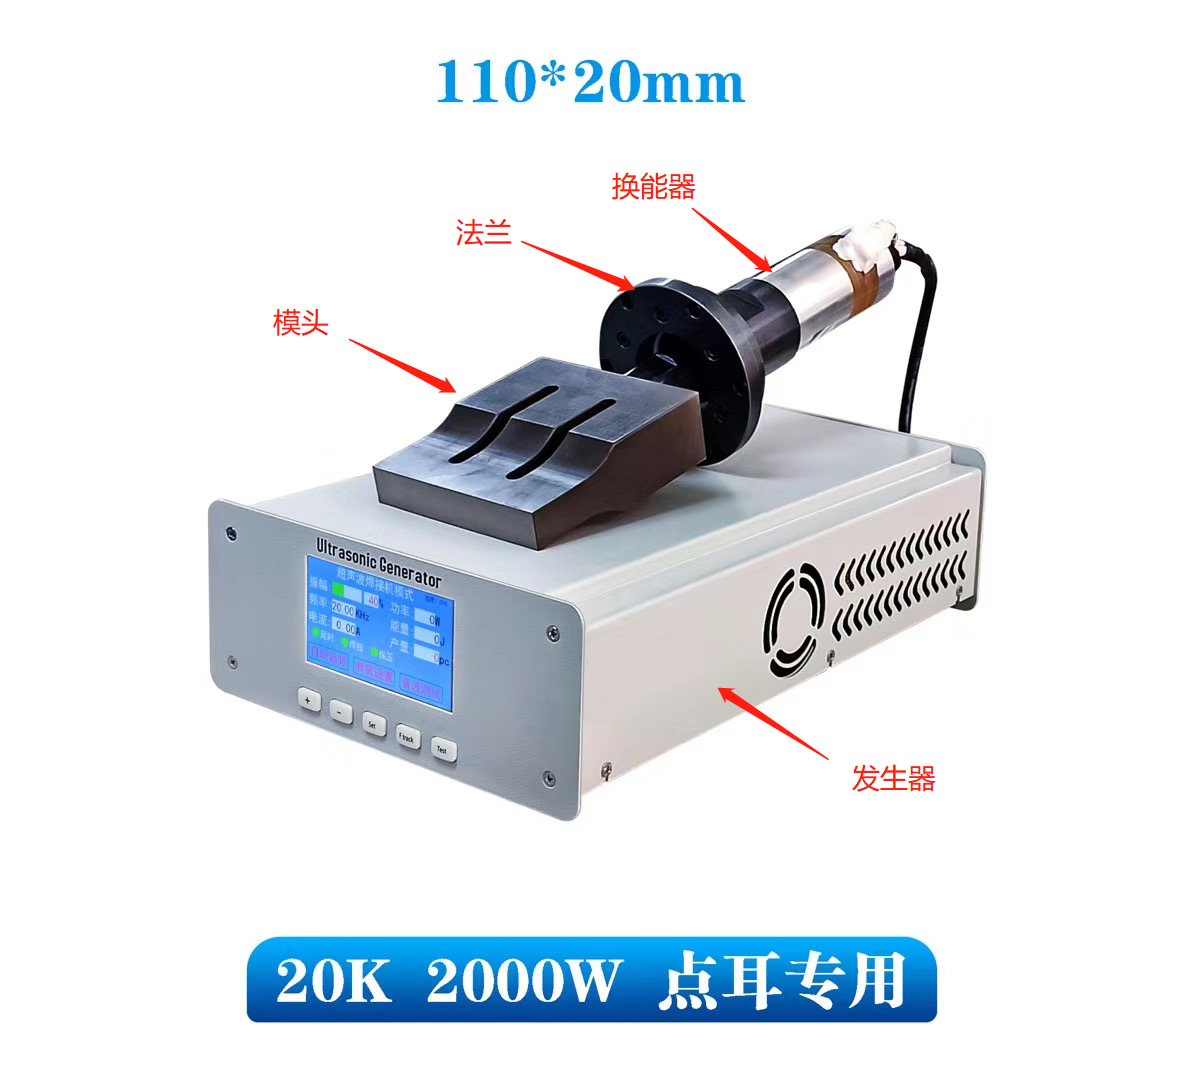 Manufacturer 20K/2000W special ultrasonic generator for mask welding and sealing